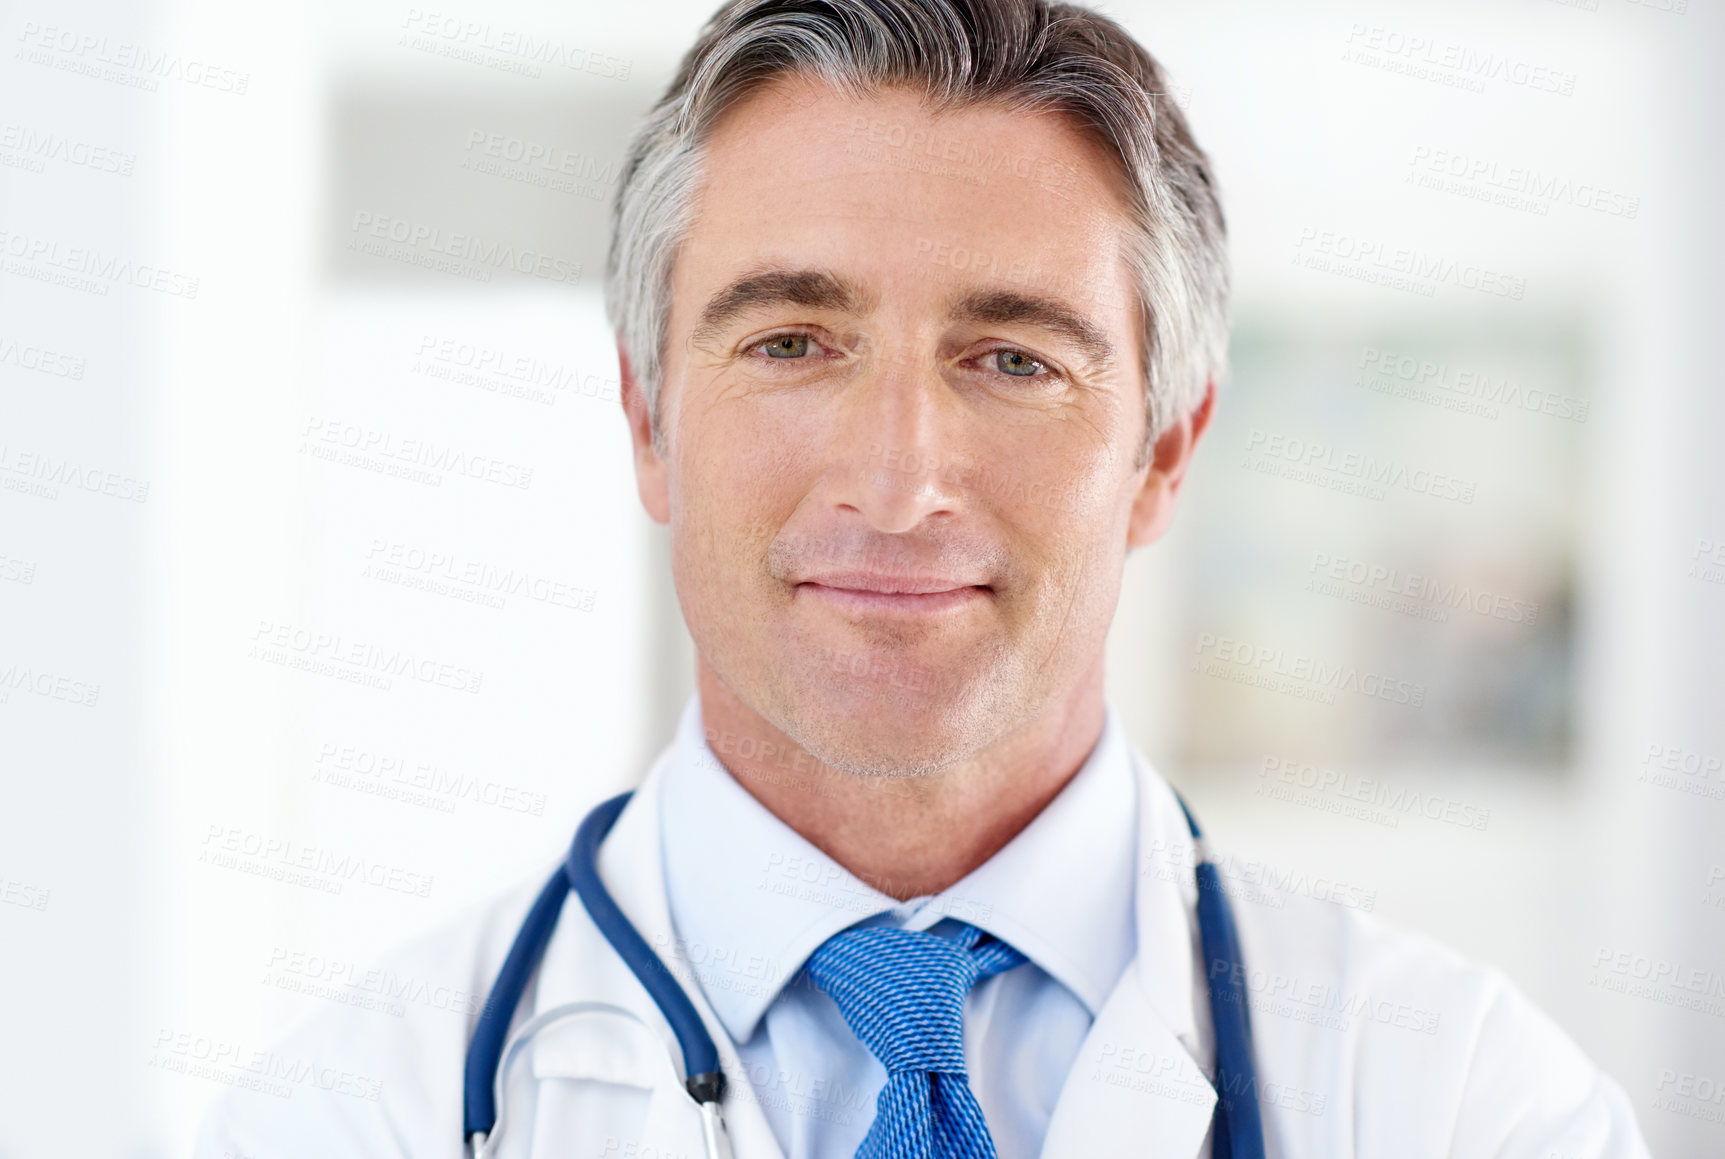 Buy stock photo Portrait of a doctor standing in a hospital corridor